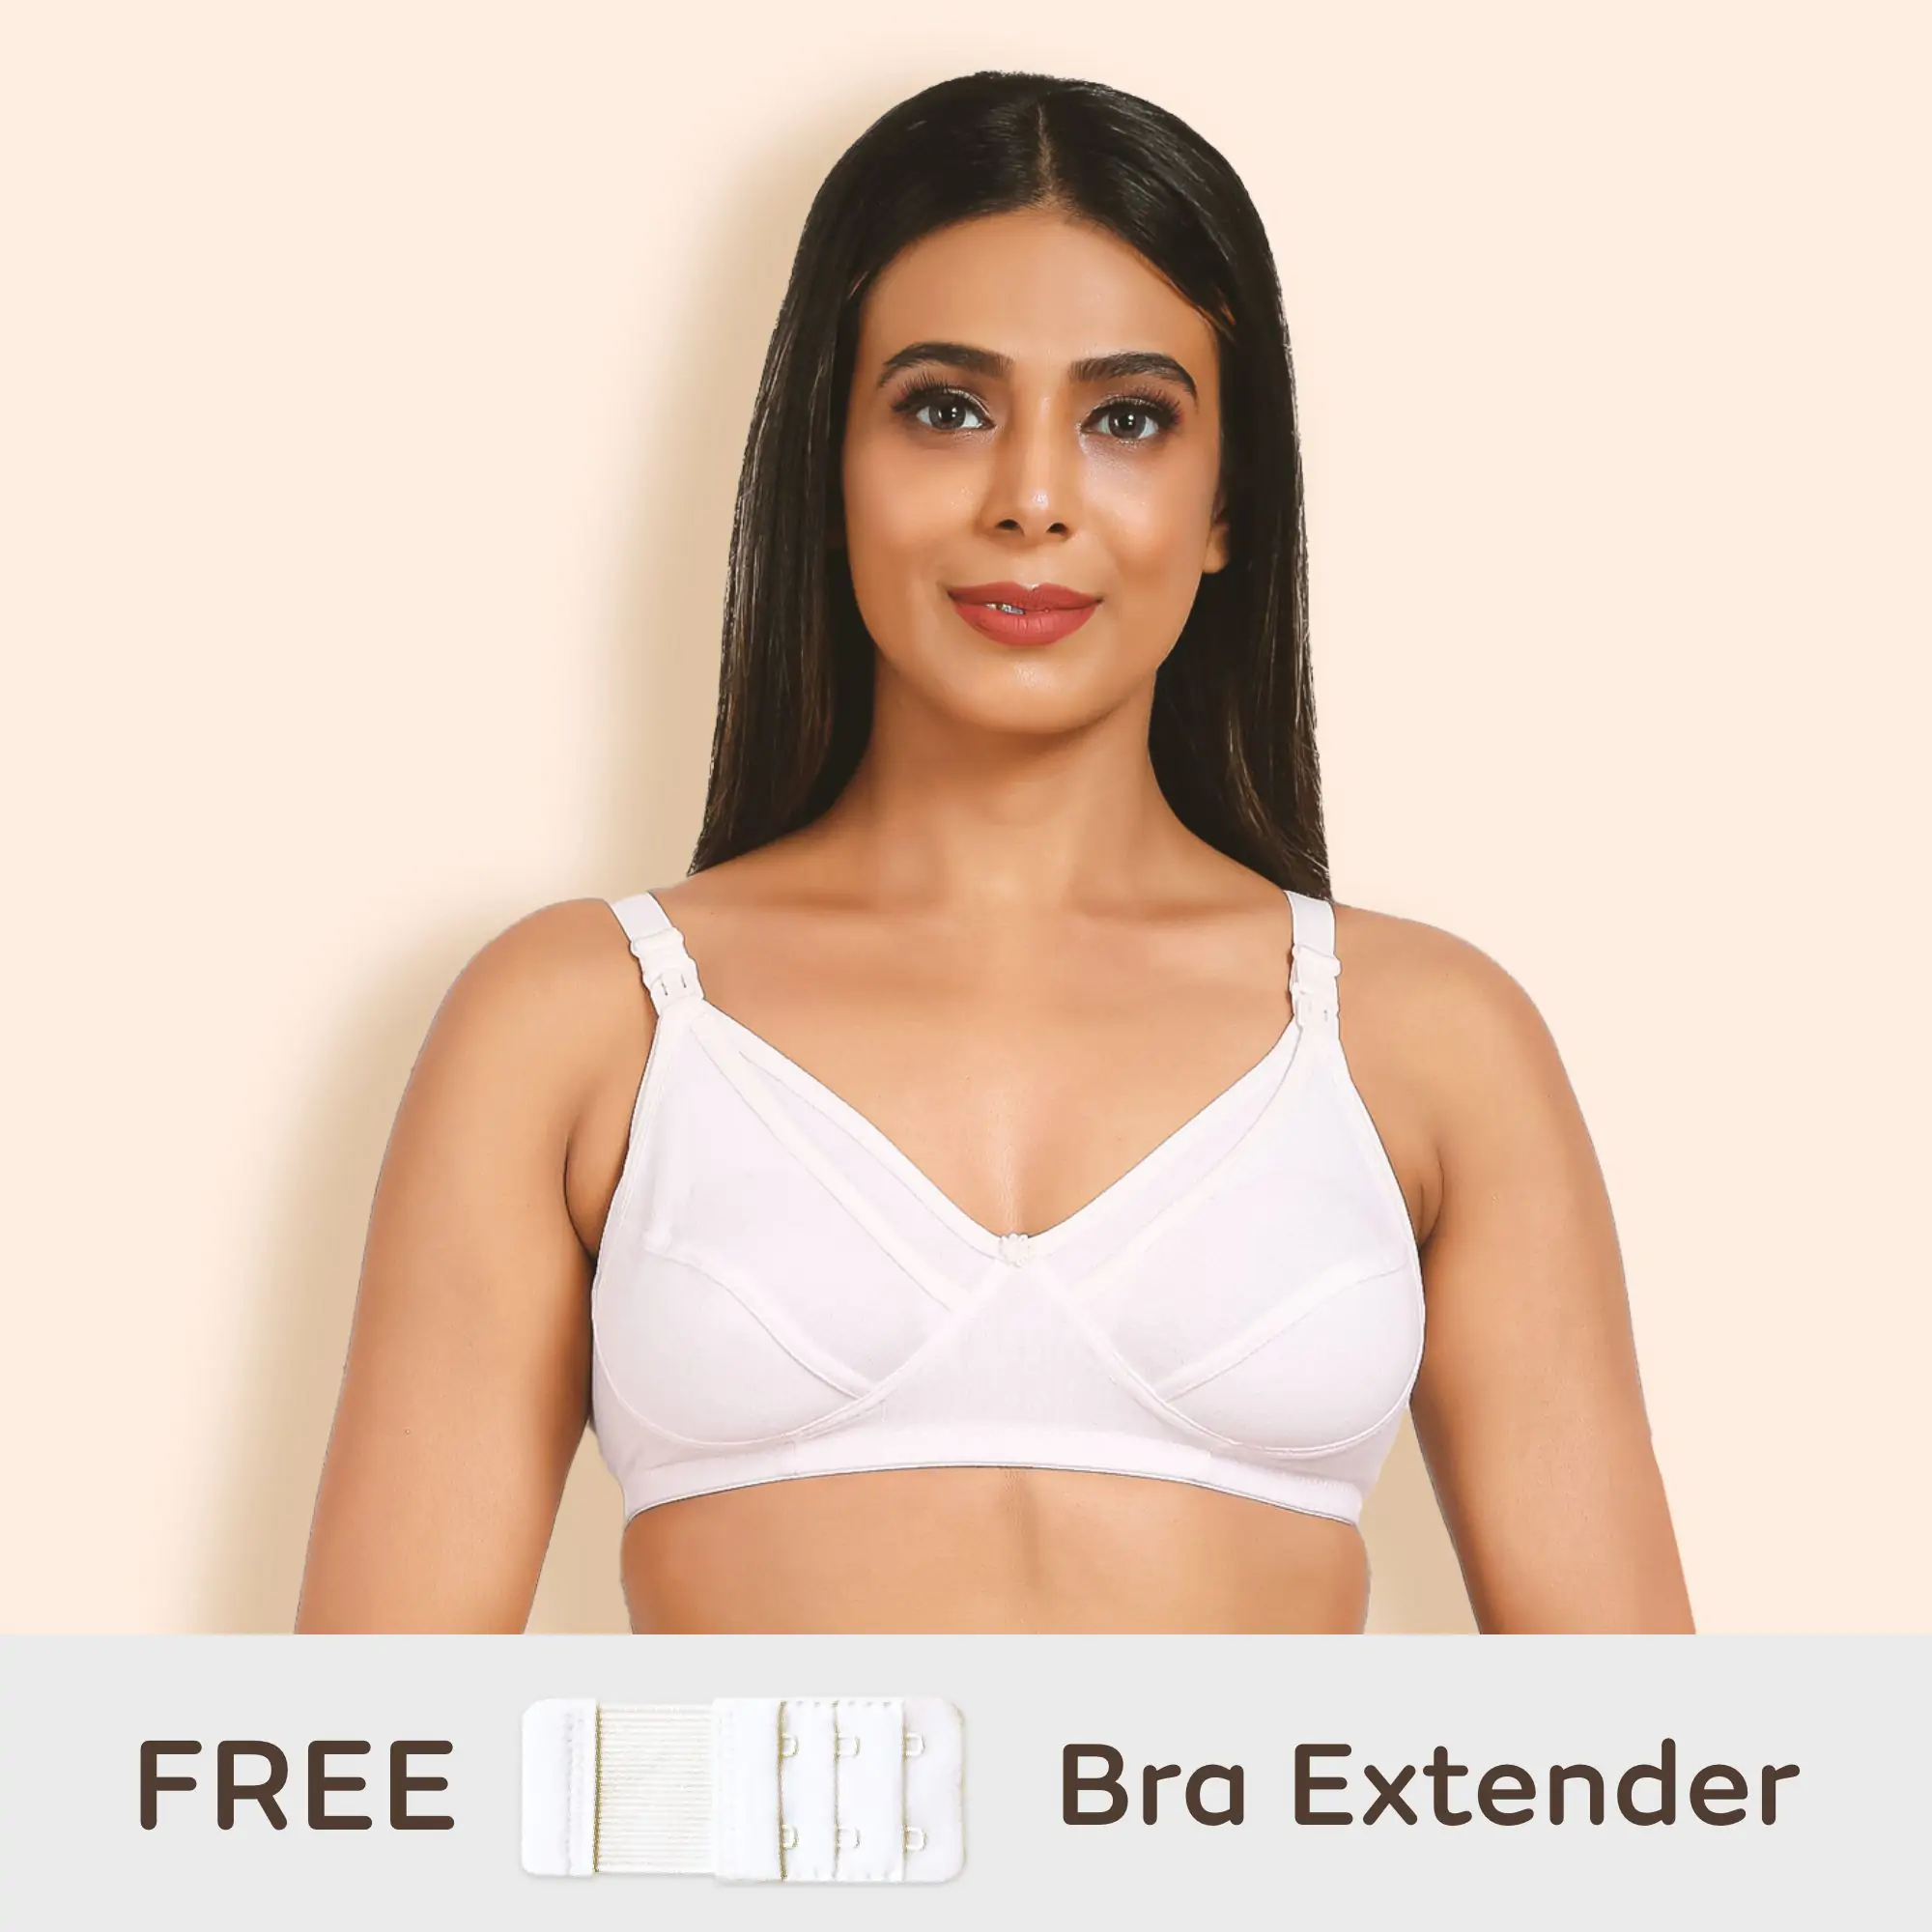 Maternity/Nursing Bras Non-Wired, Non-Padded with free Bra Extender - Classic White 36 B 